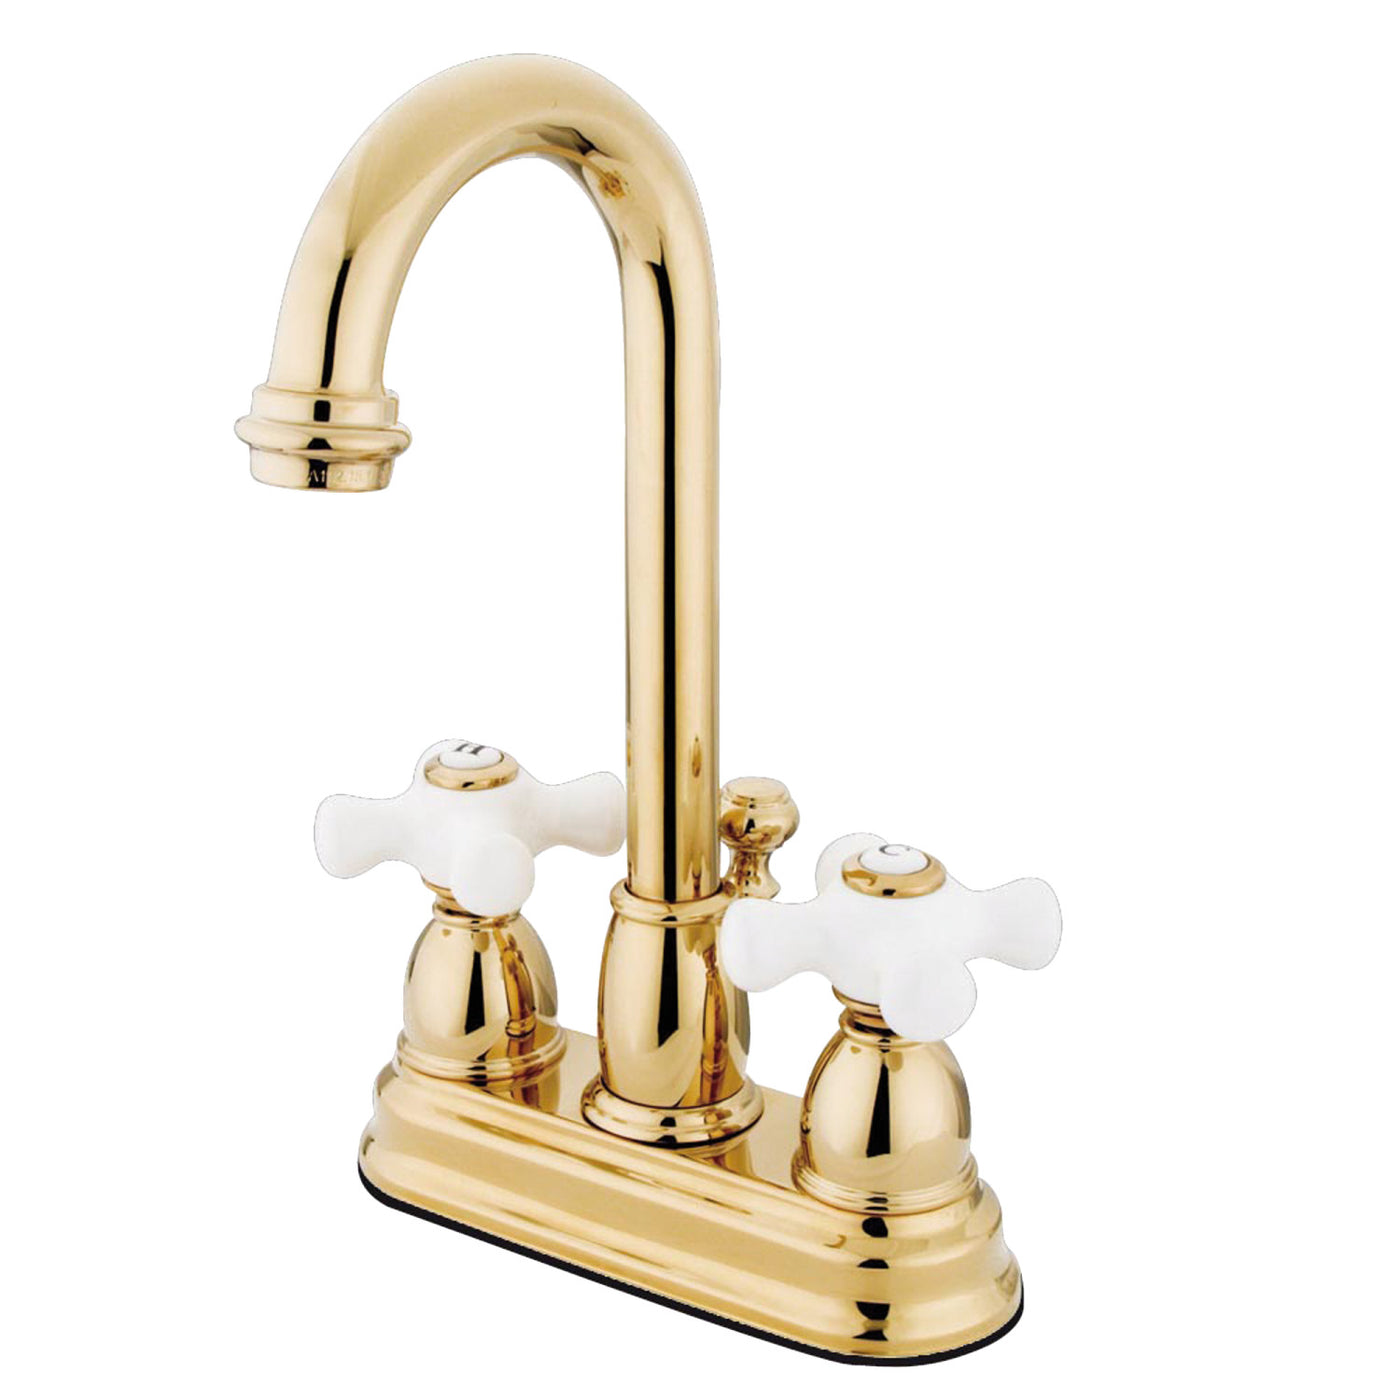 Elements of Design EB3612PX 4-Inch Centerset Bathroom Faucet, Polished Brass